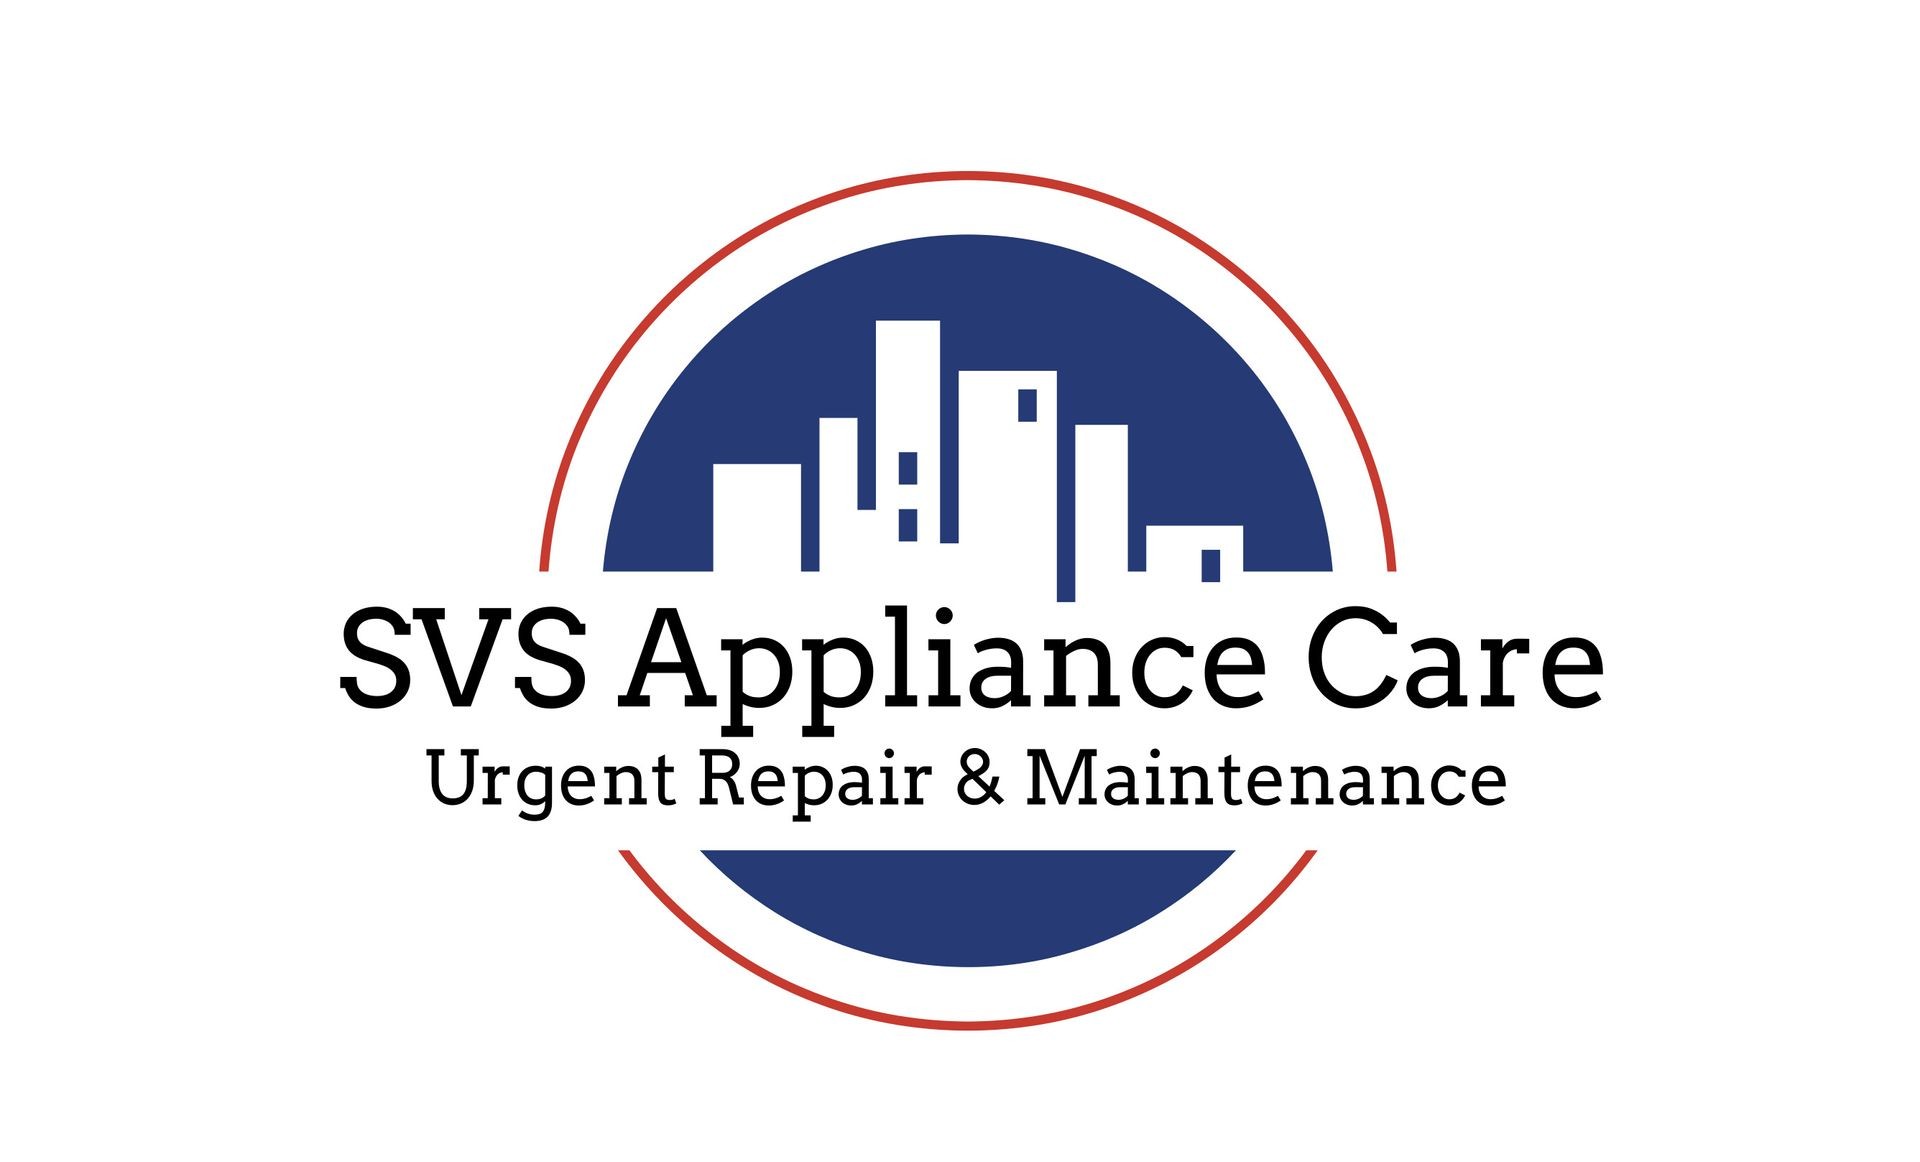 SVS Appliance Care provides reliable and affordable appliance repair services throughout North Metro Atlanta